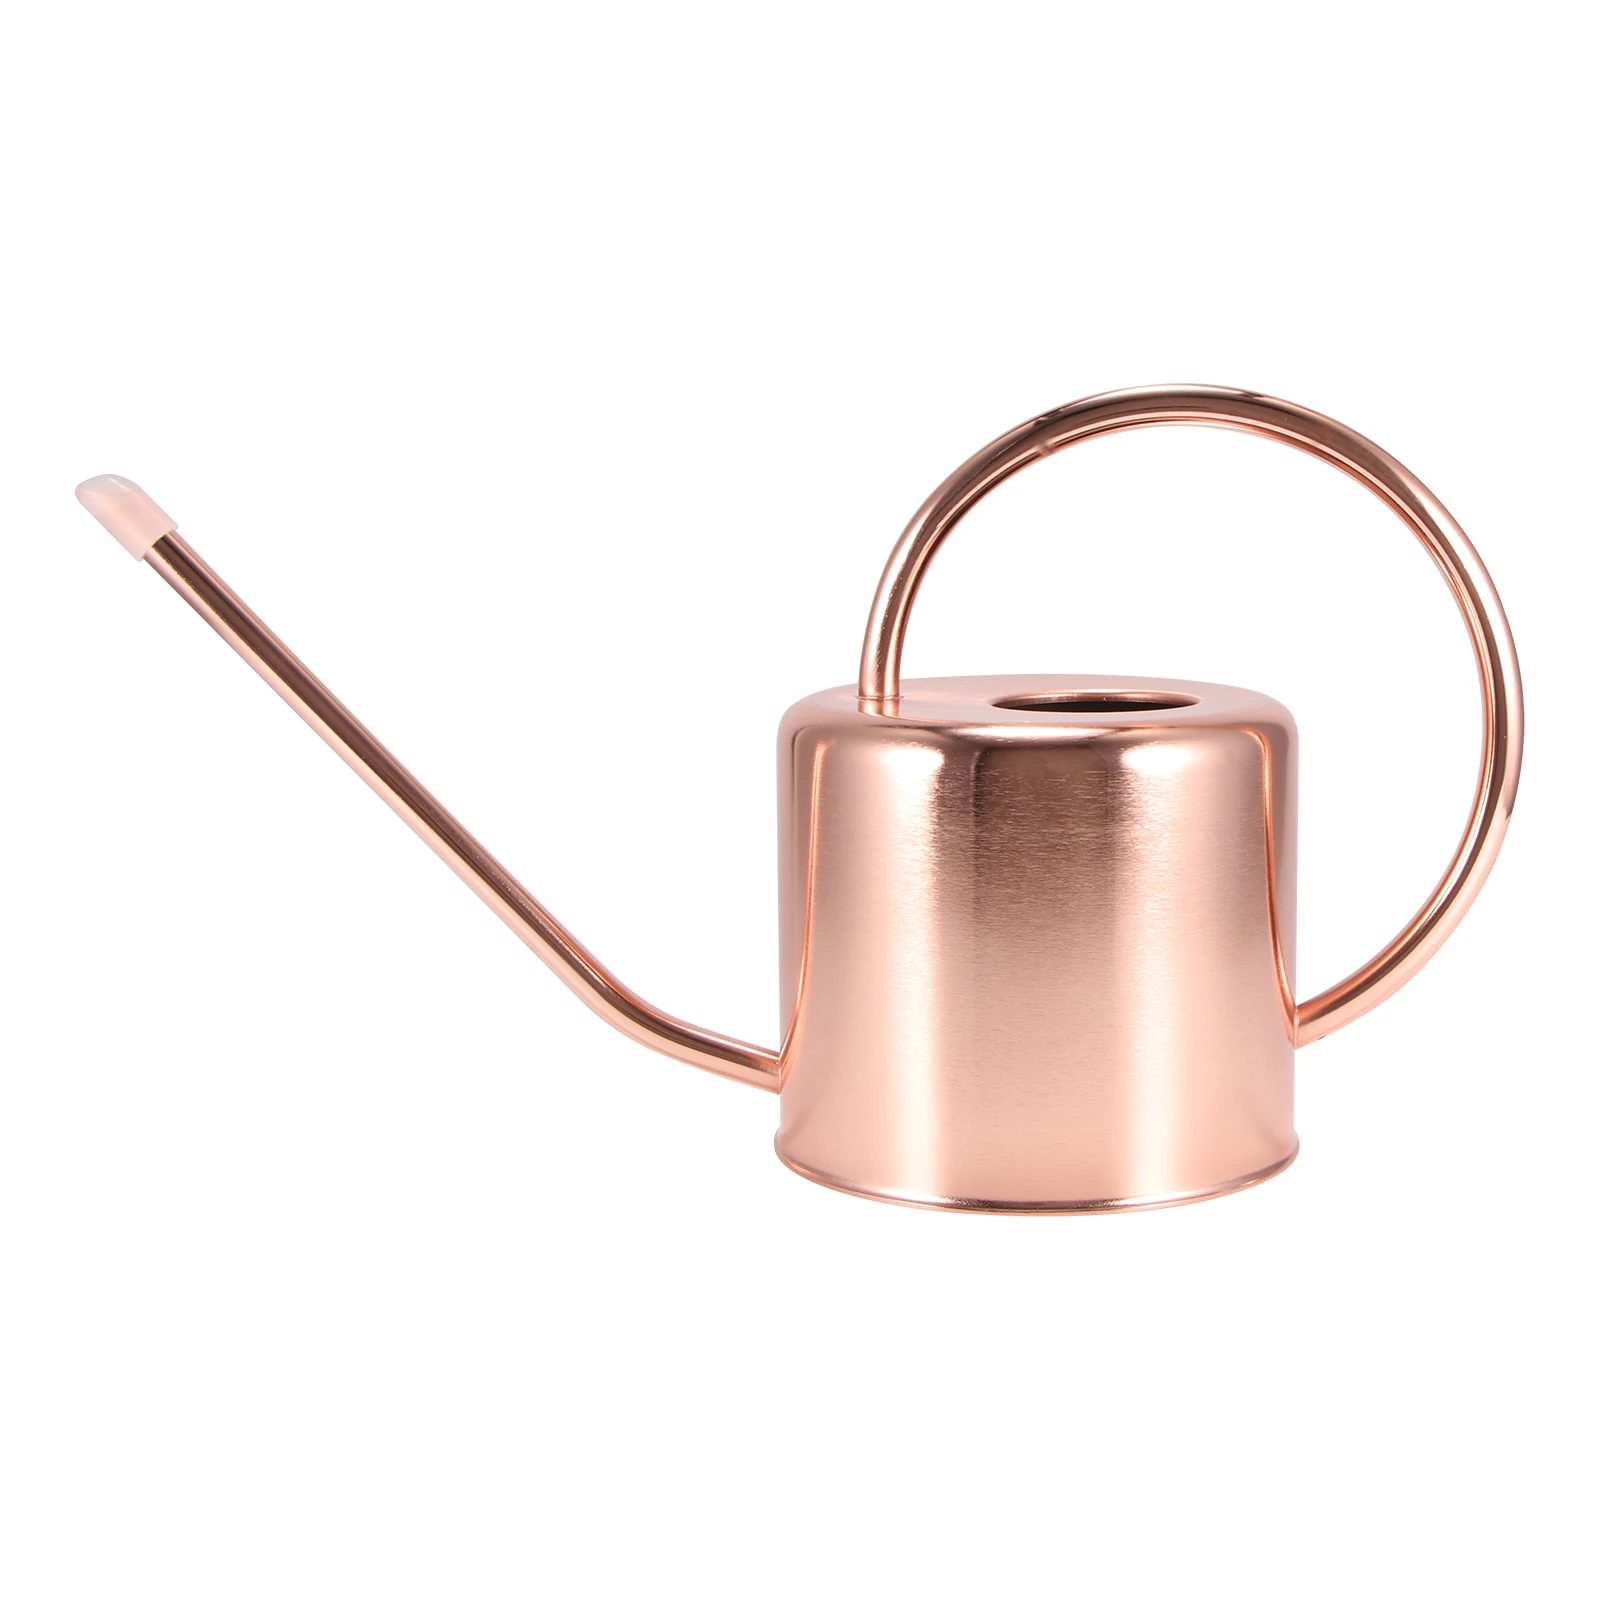 

Long Mouth Water Can Stainless Steel Rose Golden Watering Pot Garden Flower Plants Watering Cans 1200ML Kettle Gardening Tool